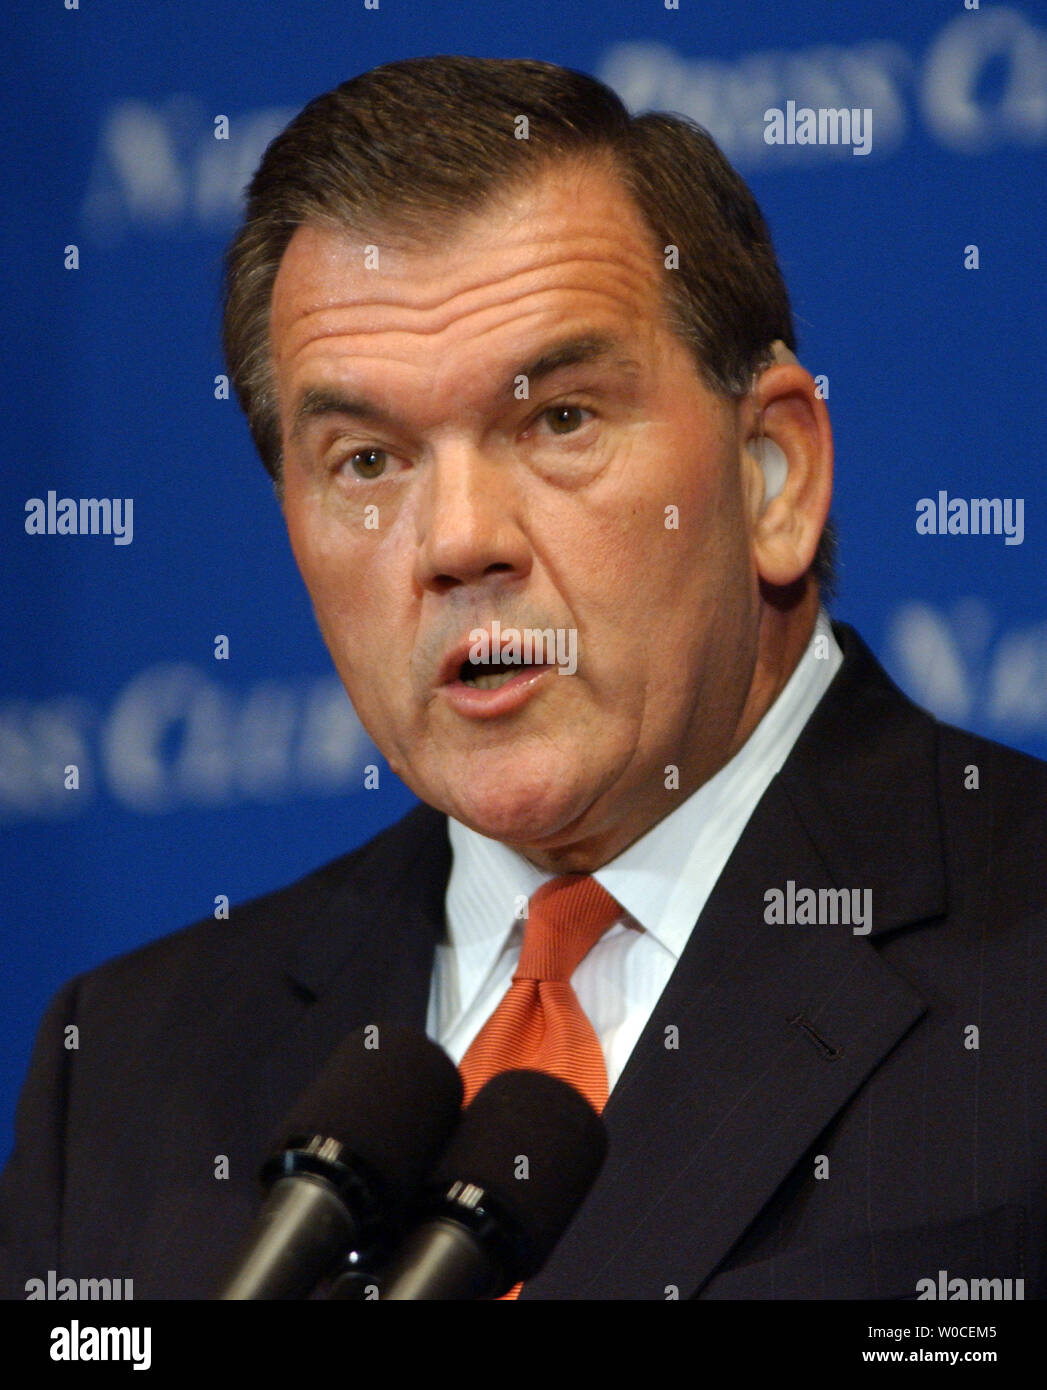 Secretary of Homeland Security Tom Ridge speaks to a luncheon at the National Press Club in Washington on Sept. 7, 2004. Ridge admitted there is still more work to be done, but insisted the U.S. was making progress in making the country safer, more secure, and more capable of responding to a terrorist attack or natural disaster.   (UPI Photo/Roger L. Wollenberg) Stock Photo